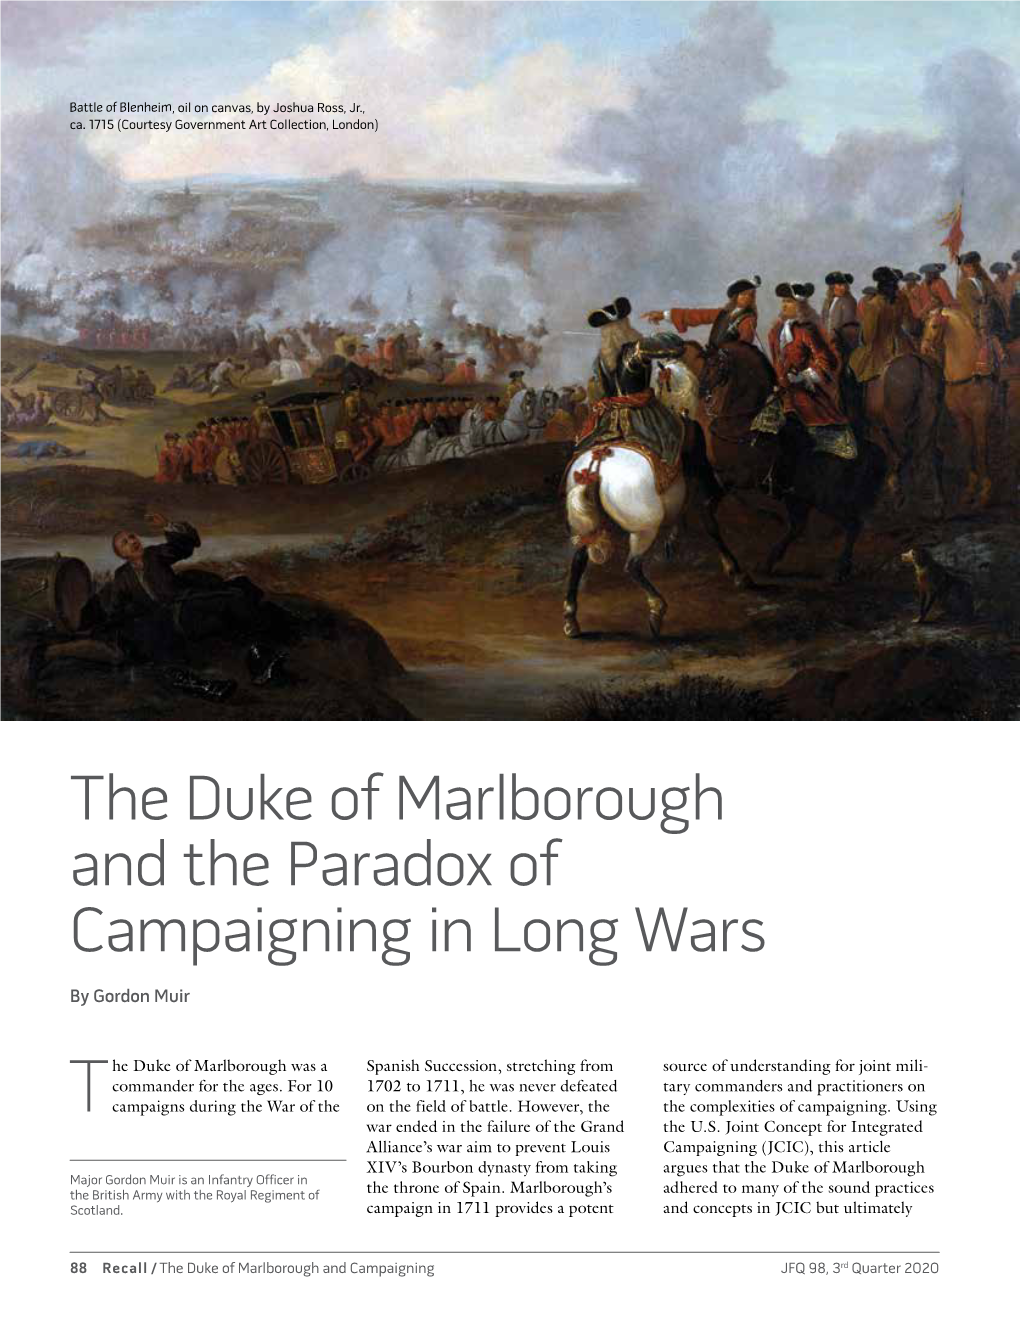 The Duke of Marlborough and the Paradox of Campaigning in Long Wars